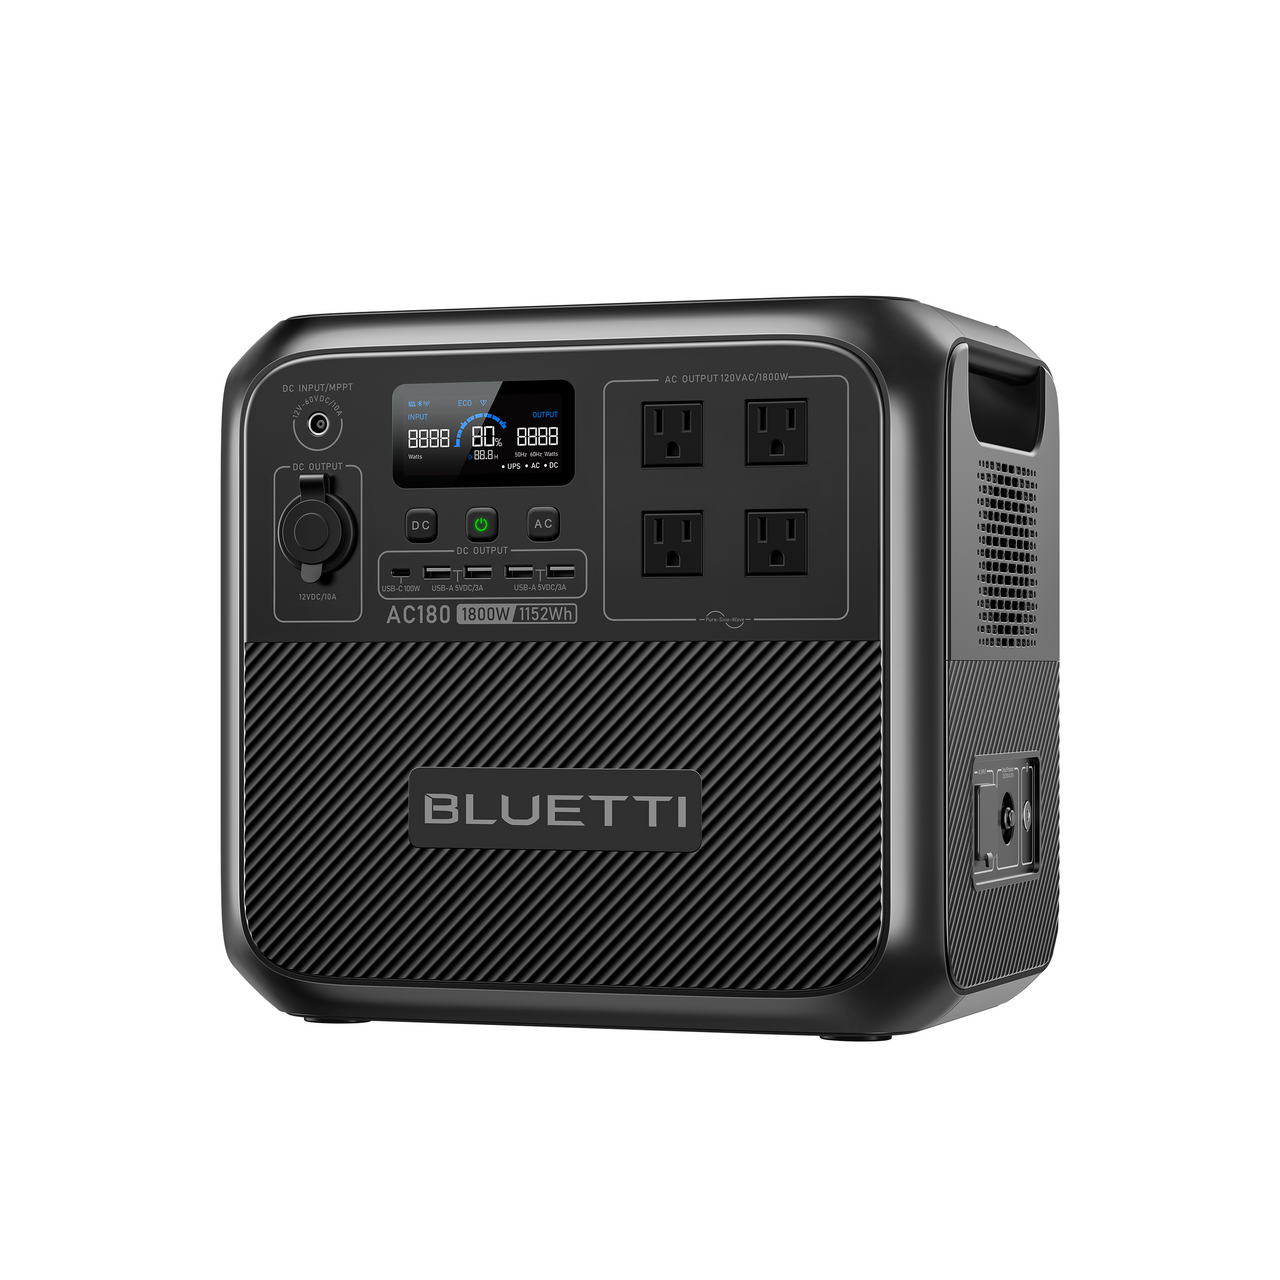 Bluetti AC180 1.8 kW Power Station Review by Ken Rockwell